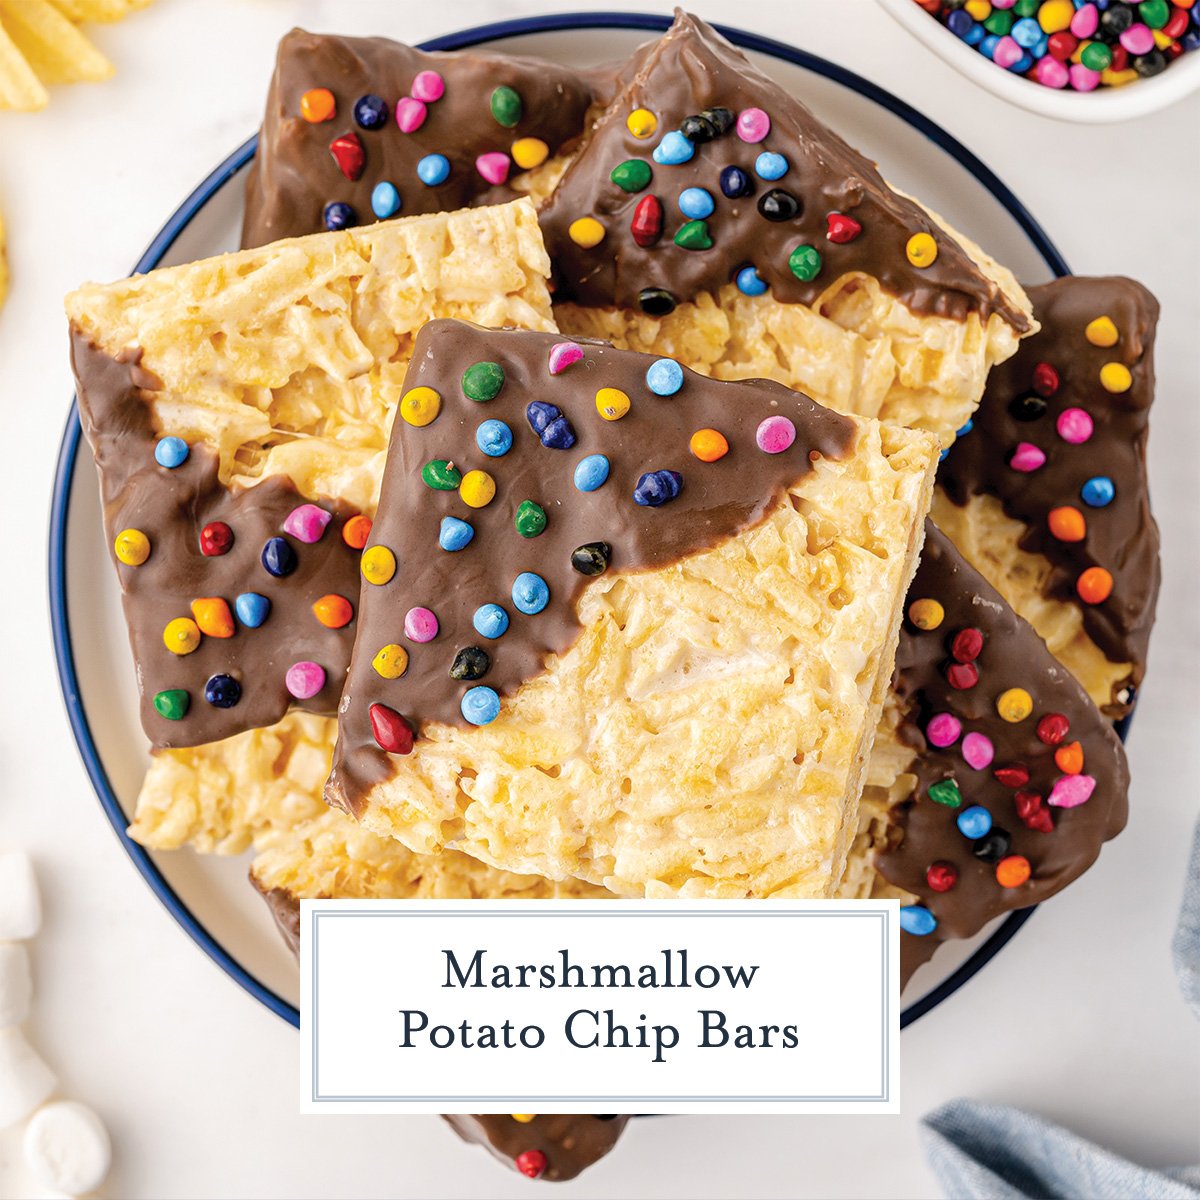 plate of potato chip marshmallow bars with chocolate dip and text overlay